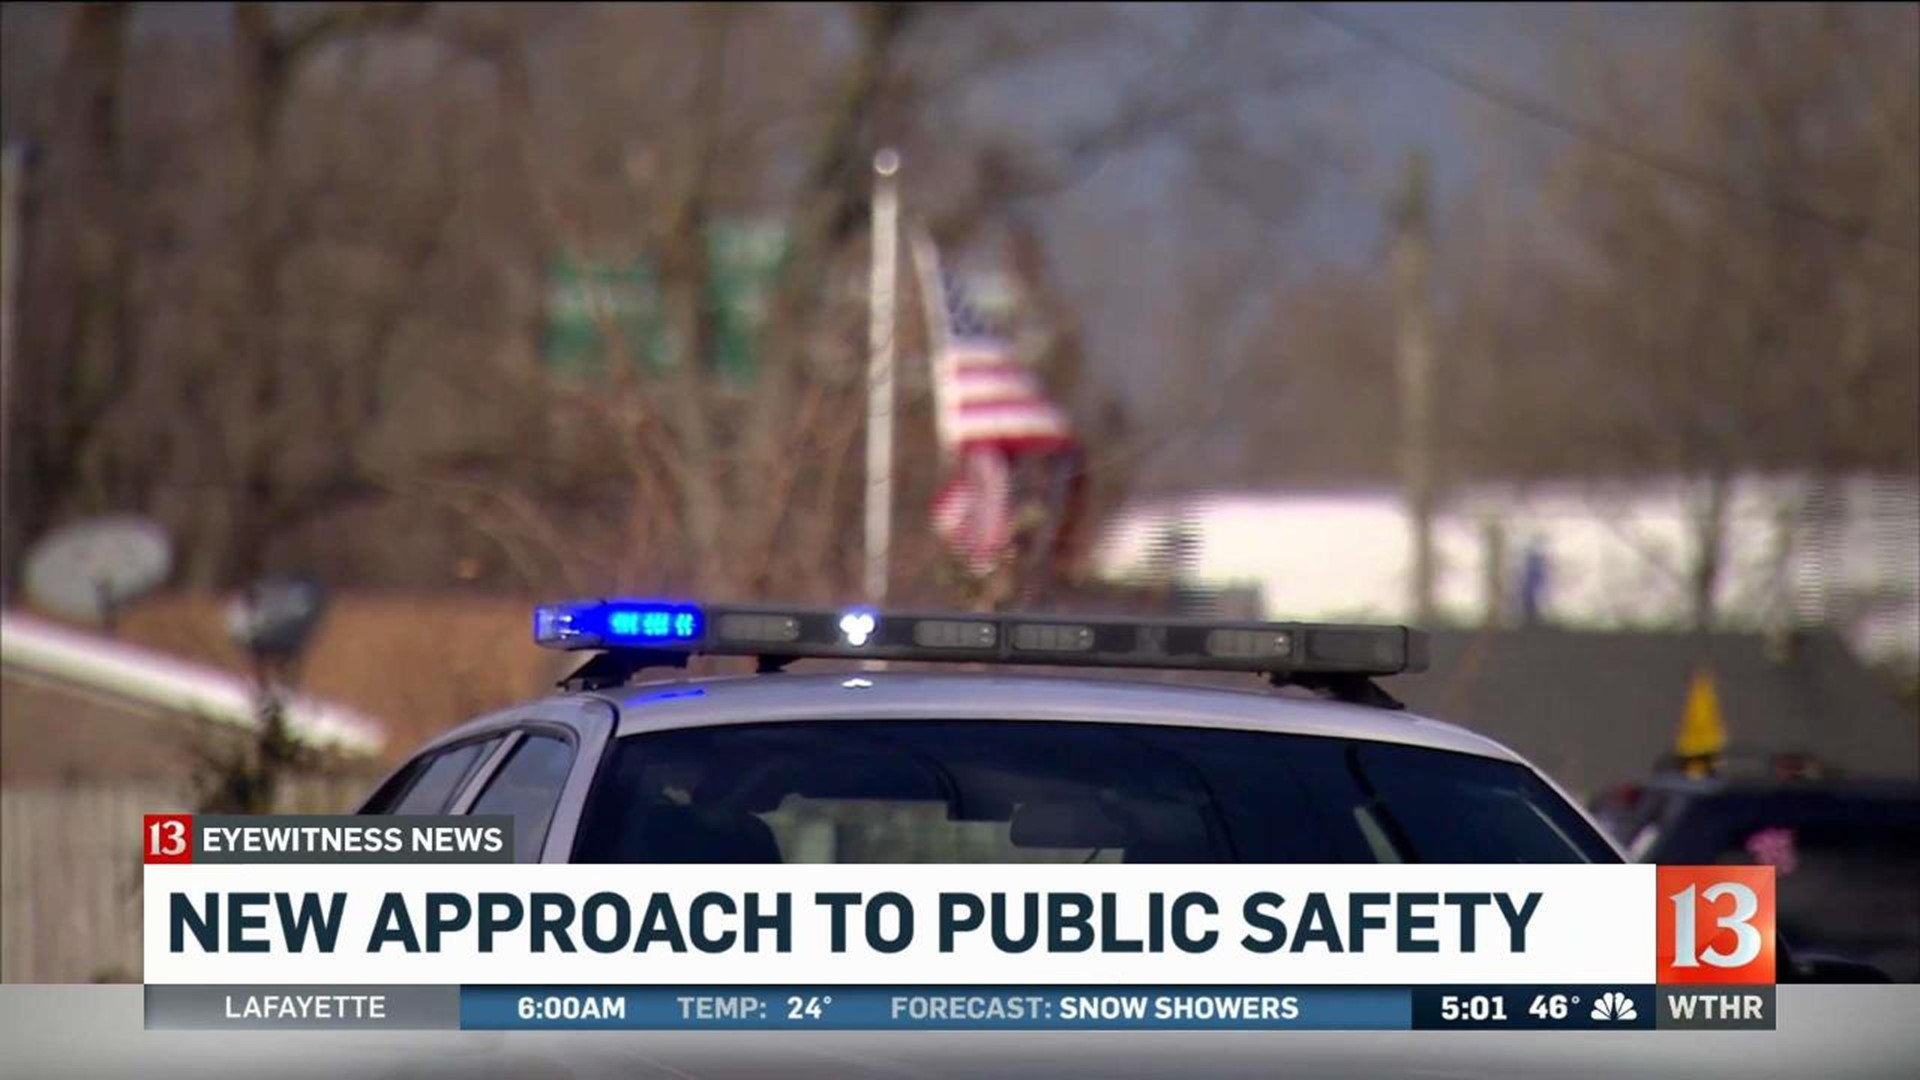 New approach to public safety